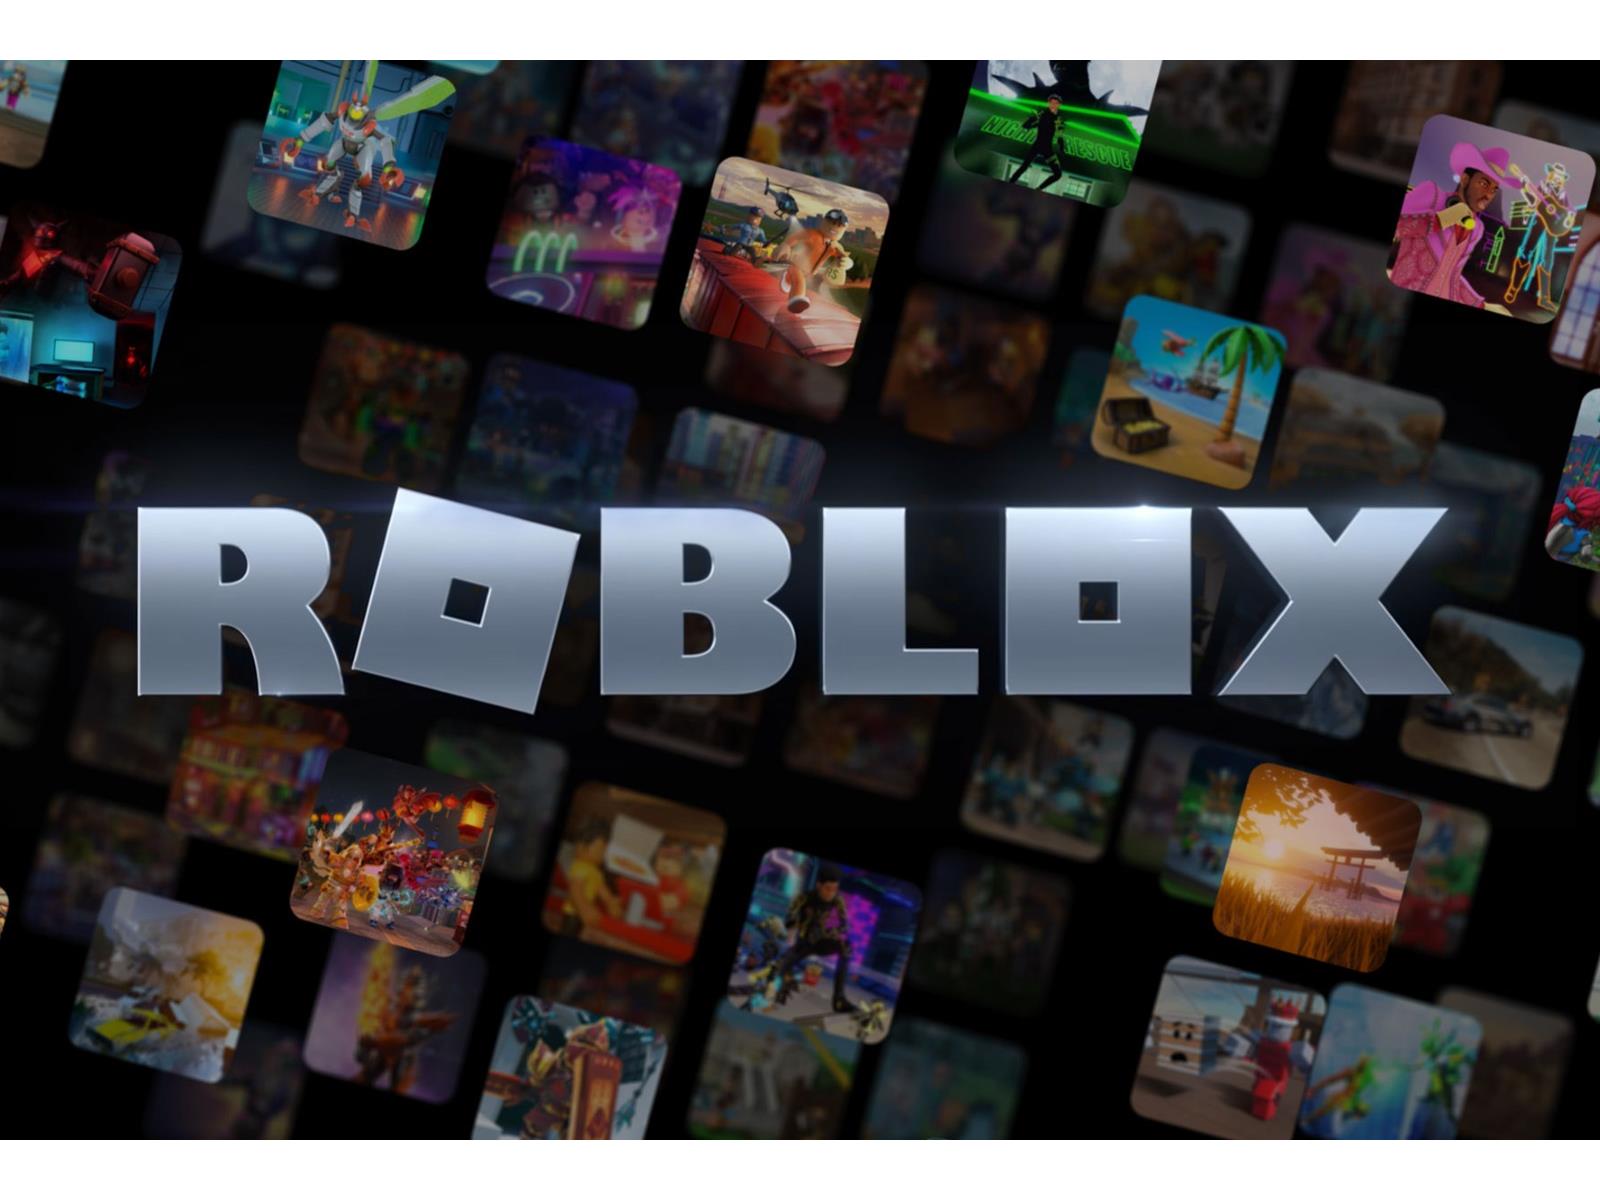 October 2021 Roblox Outage